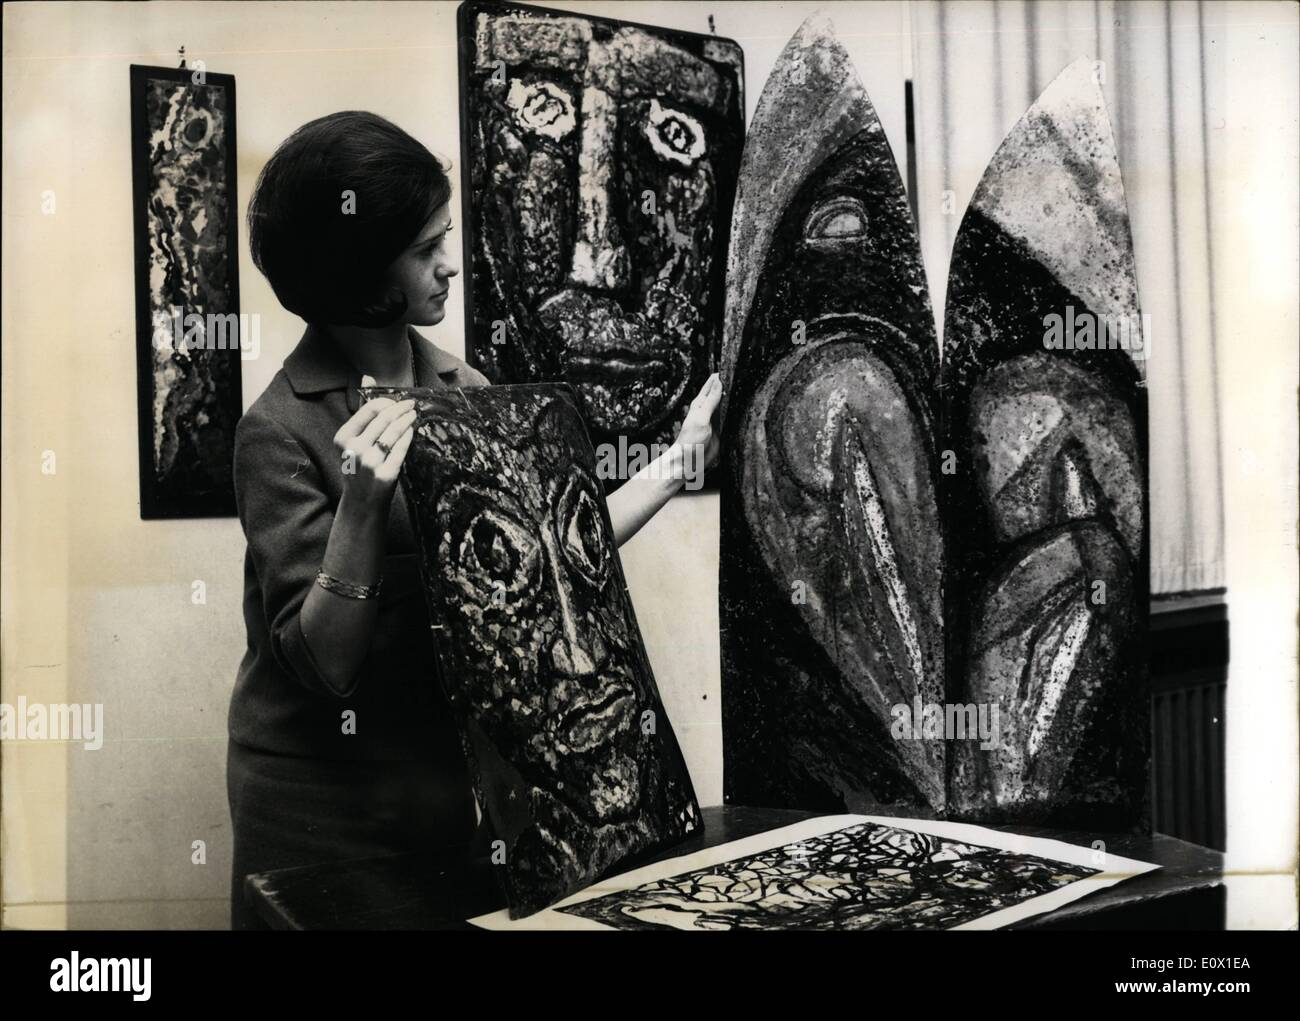 Dec. 12, 1964 - Enamel-art is a rare branch of artists. Some impressive creations of Mrs. Weixlgartner-Neutra and Mrs. Soederberg-Weixlgartner from Austria are shown in Frankfurt recently. Art in enamel asks for high technical skill besides the artists influence. Stock Photo